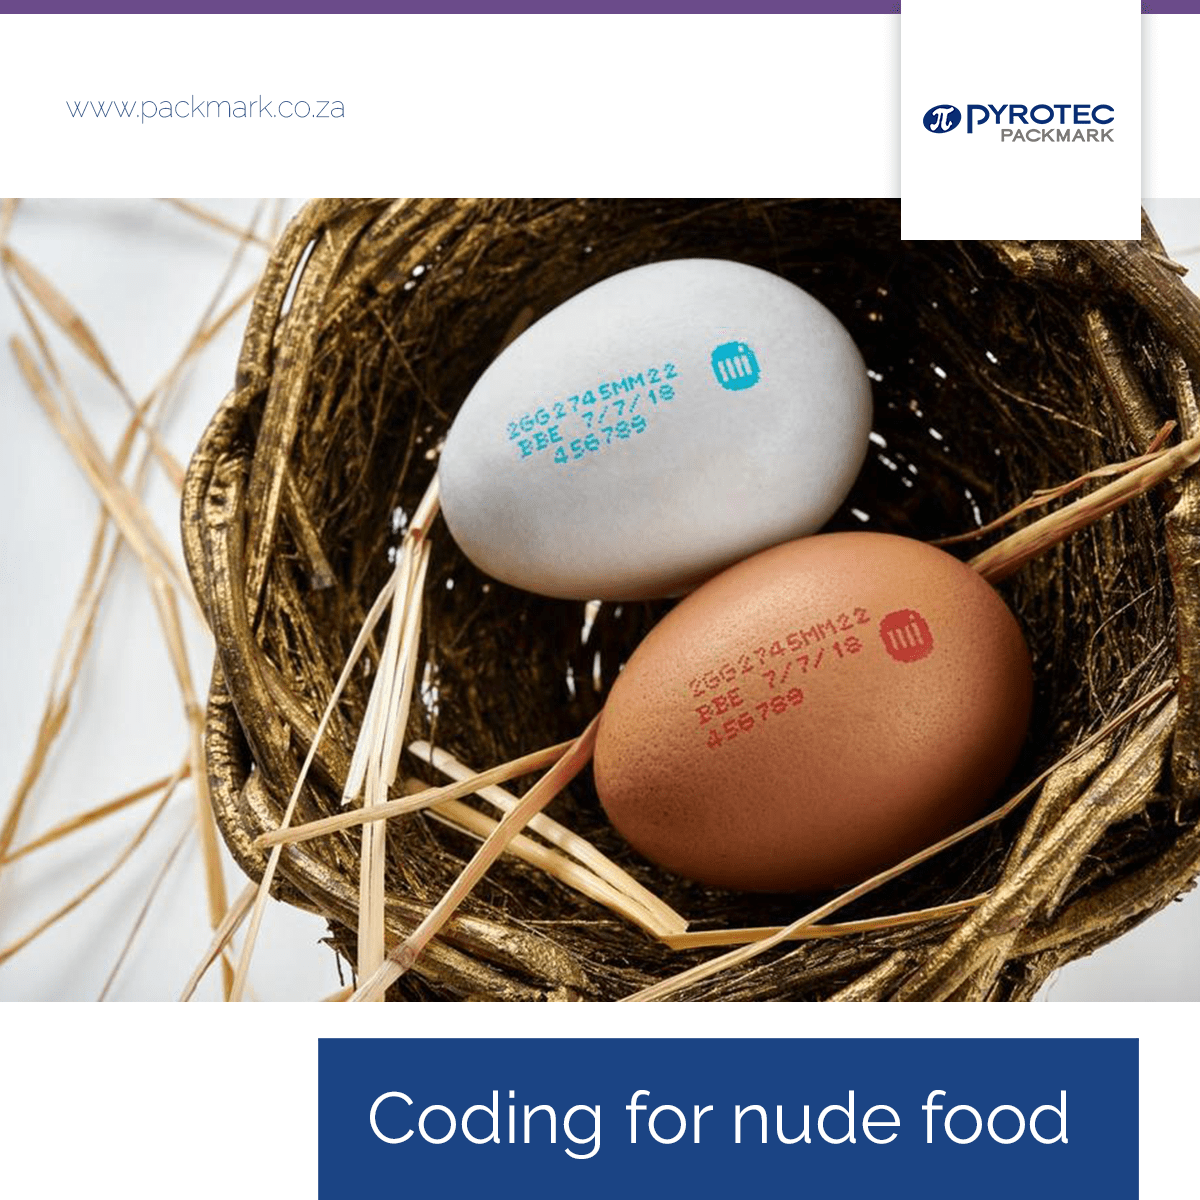 Blog August Coding for nude food